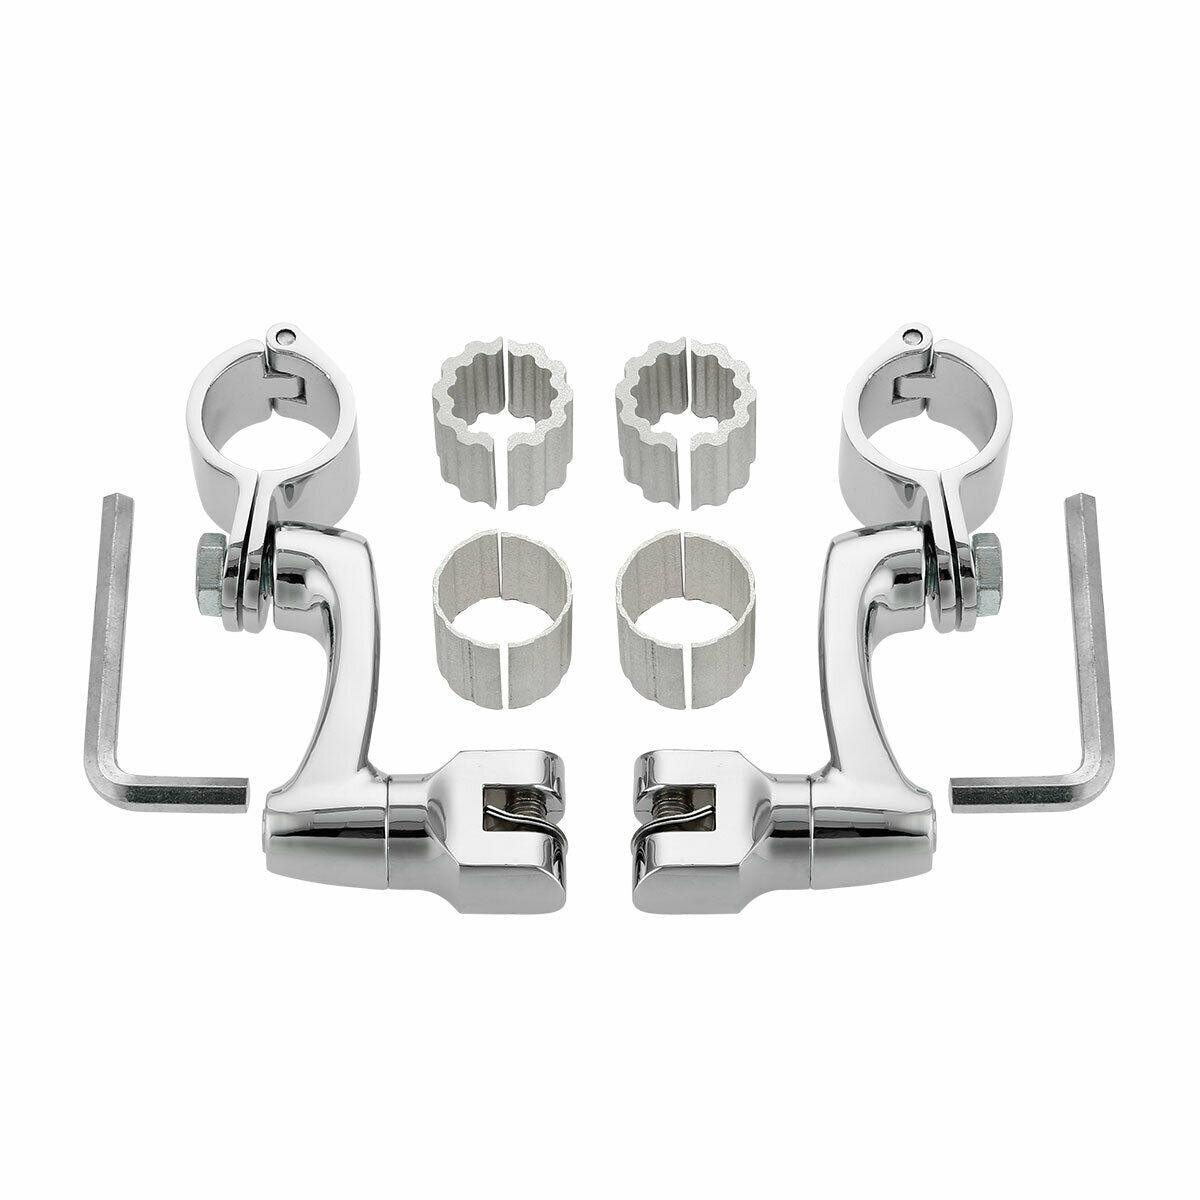 35mm Highway Foot Pegs Mount Clamp Fit For Harley Touring Sportster Dyna Softail - Moto Life Products